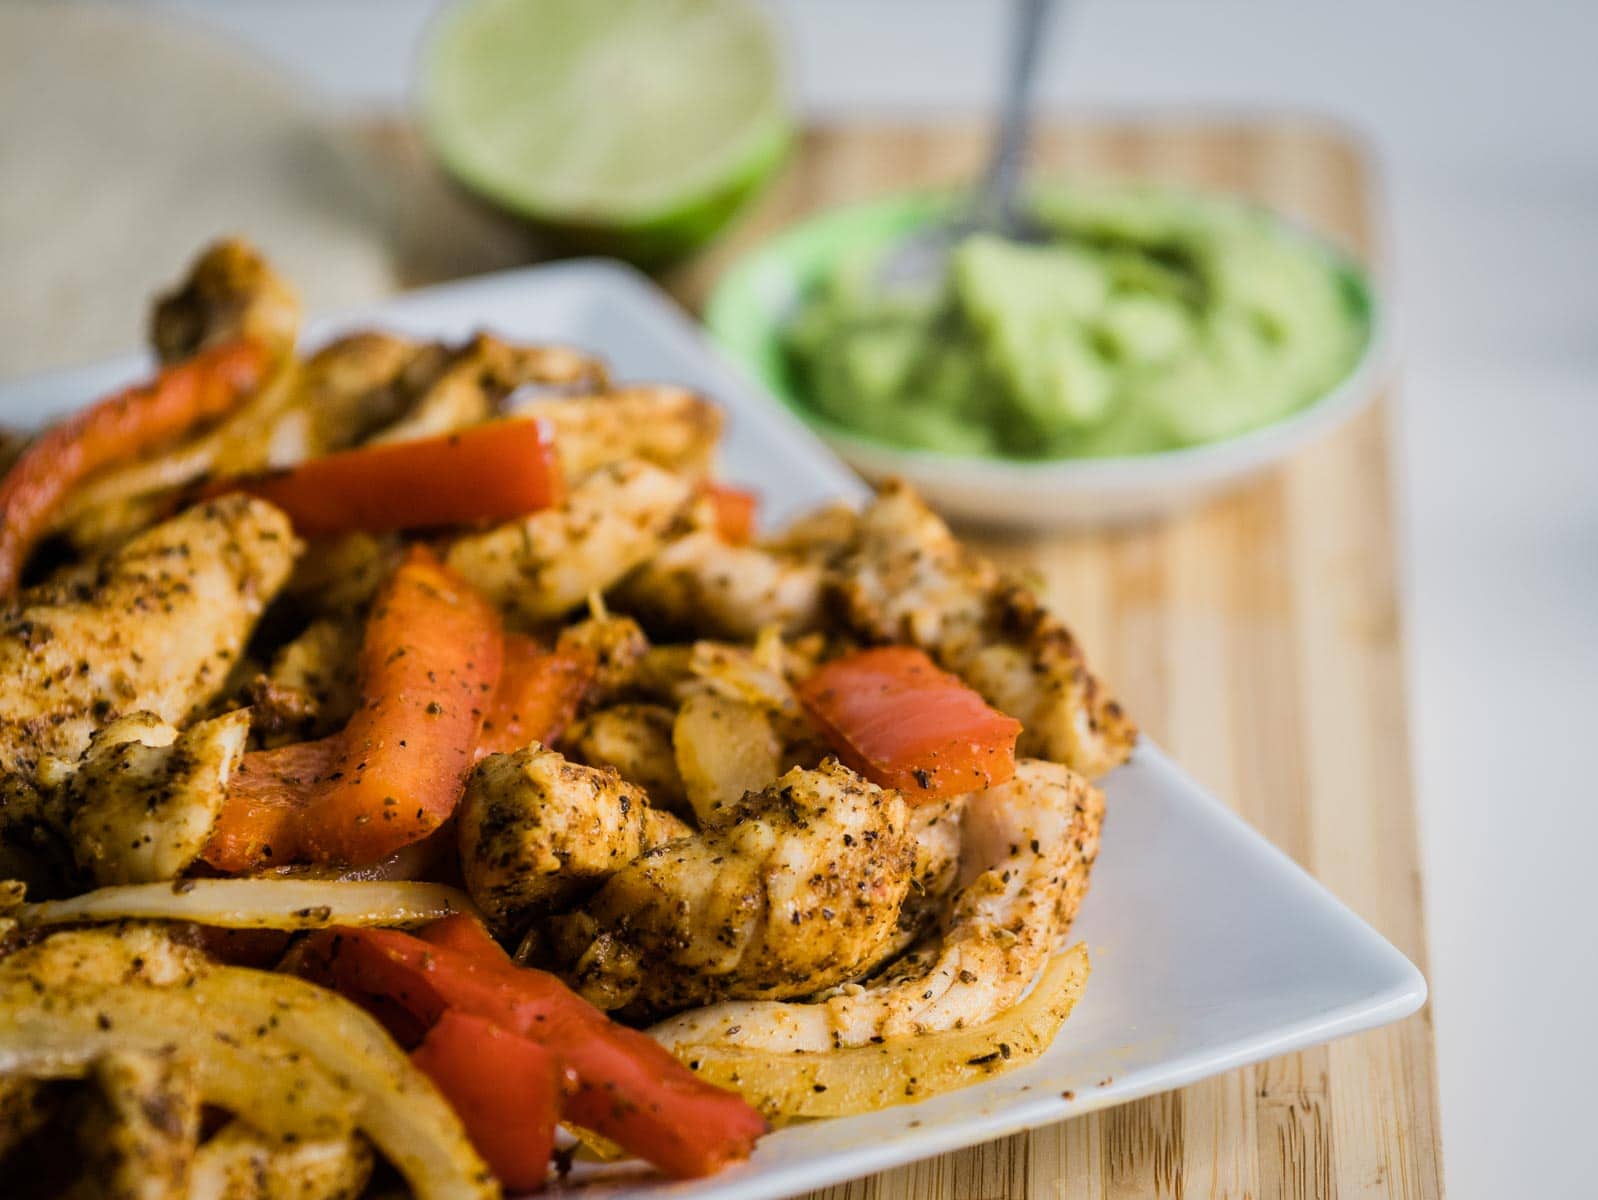 Plate of chicken fajitas with chicken, red bell peppers and onion.